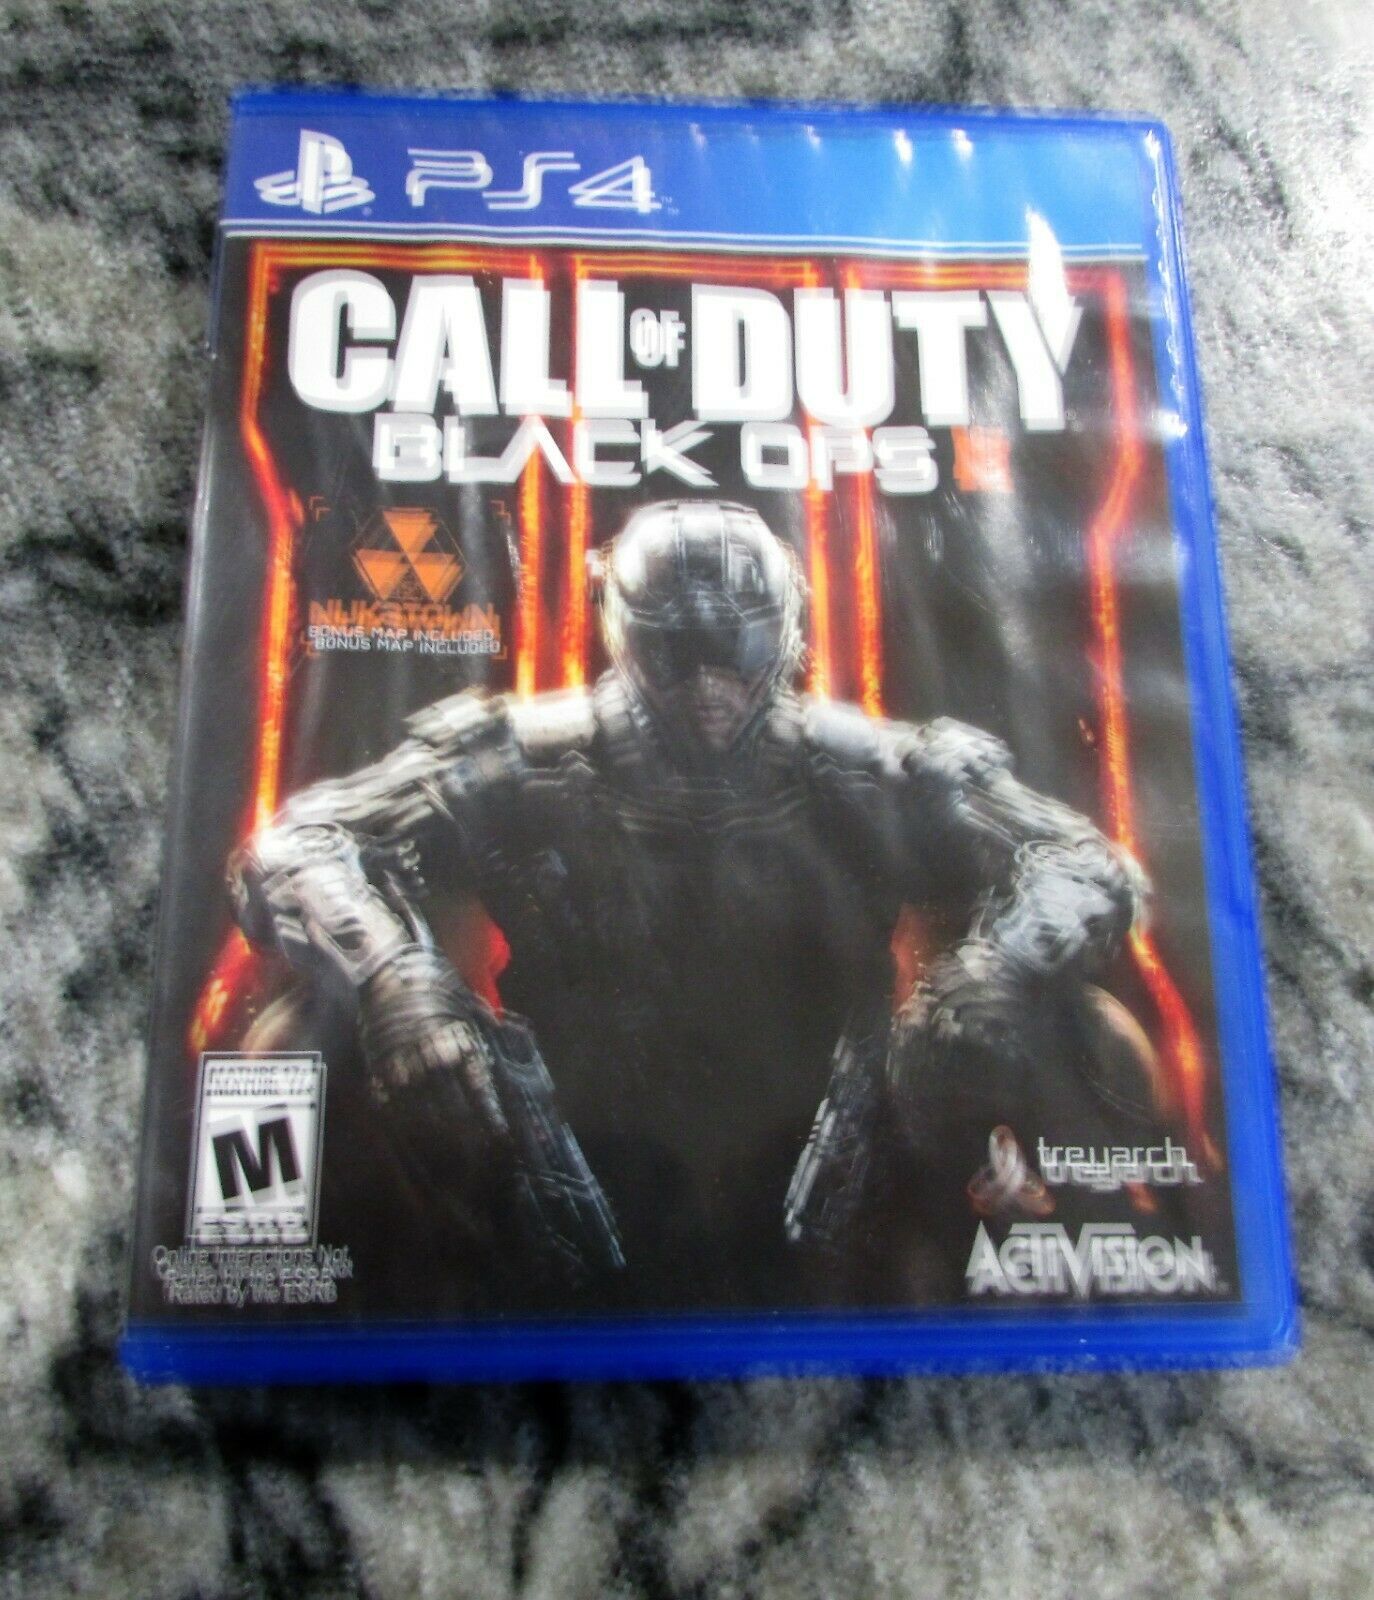 Primary image for ps4 call of duty black ops 3